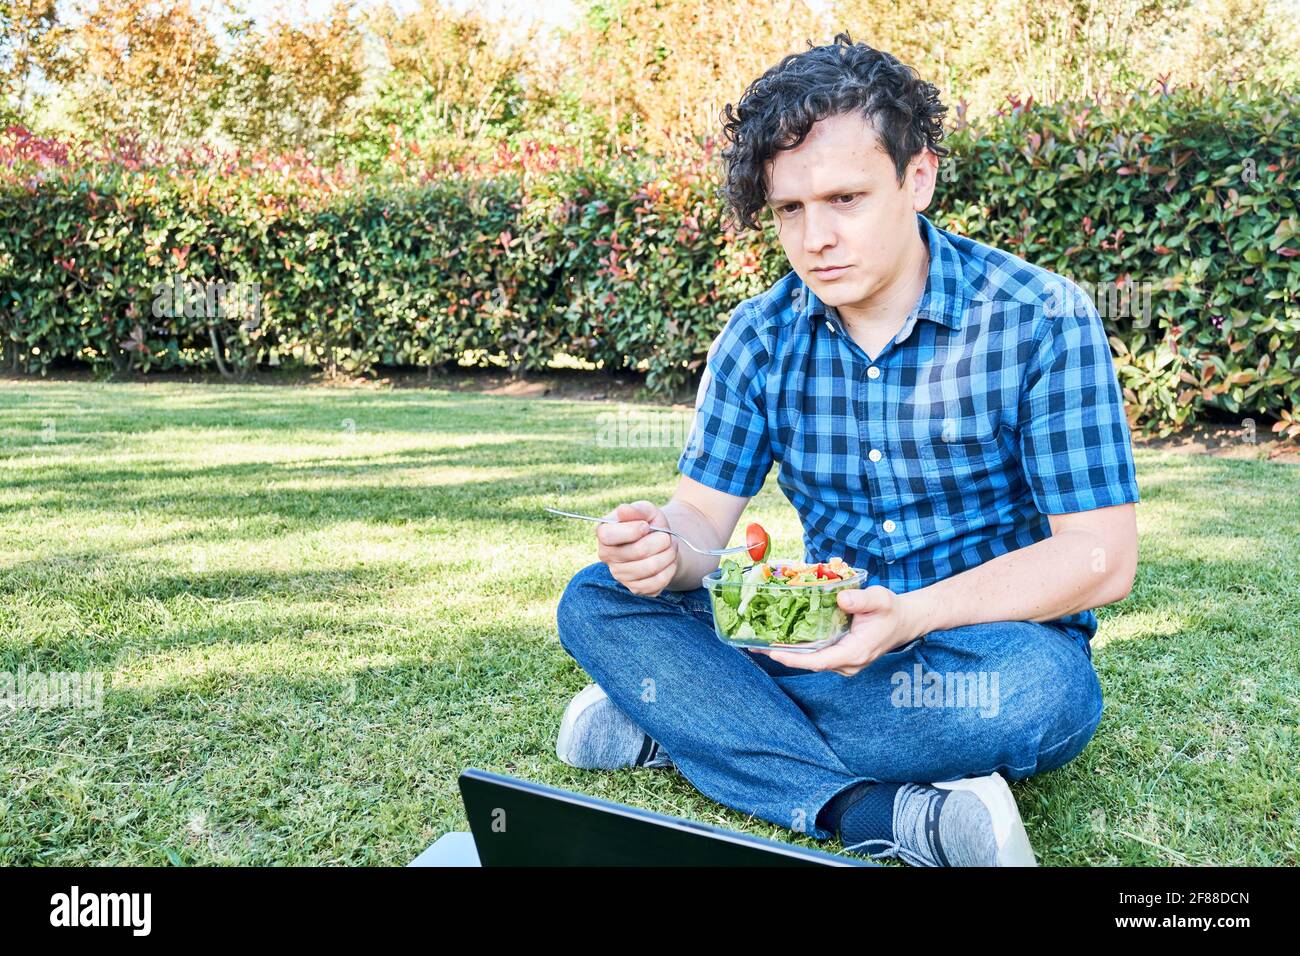 Young man sitting in the grass eating a fresh salad during a break, while working or studying on his laptop. Concepts of working outdoors and healthy Stock Photo